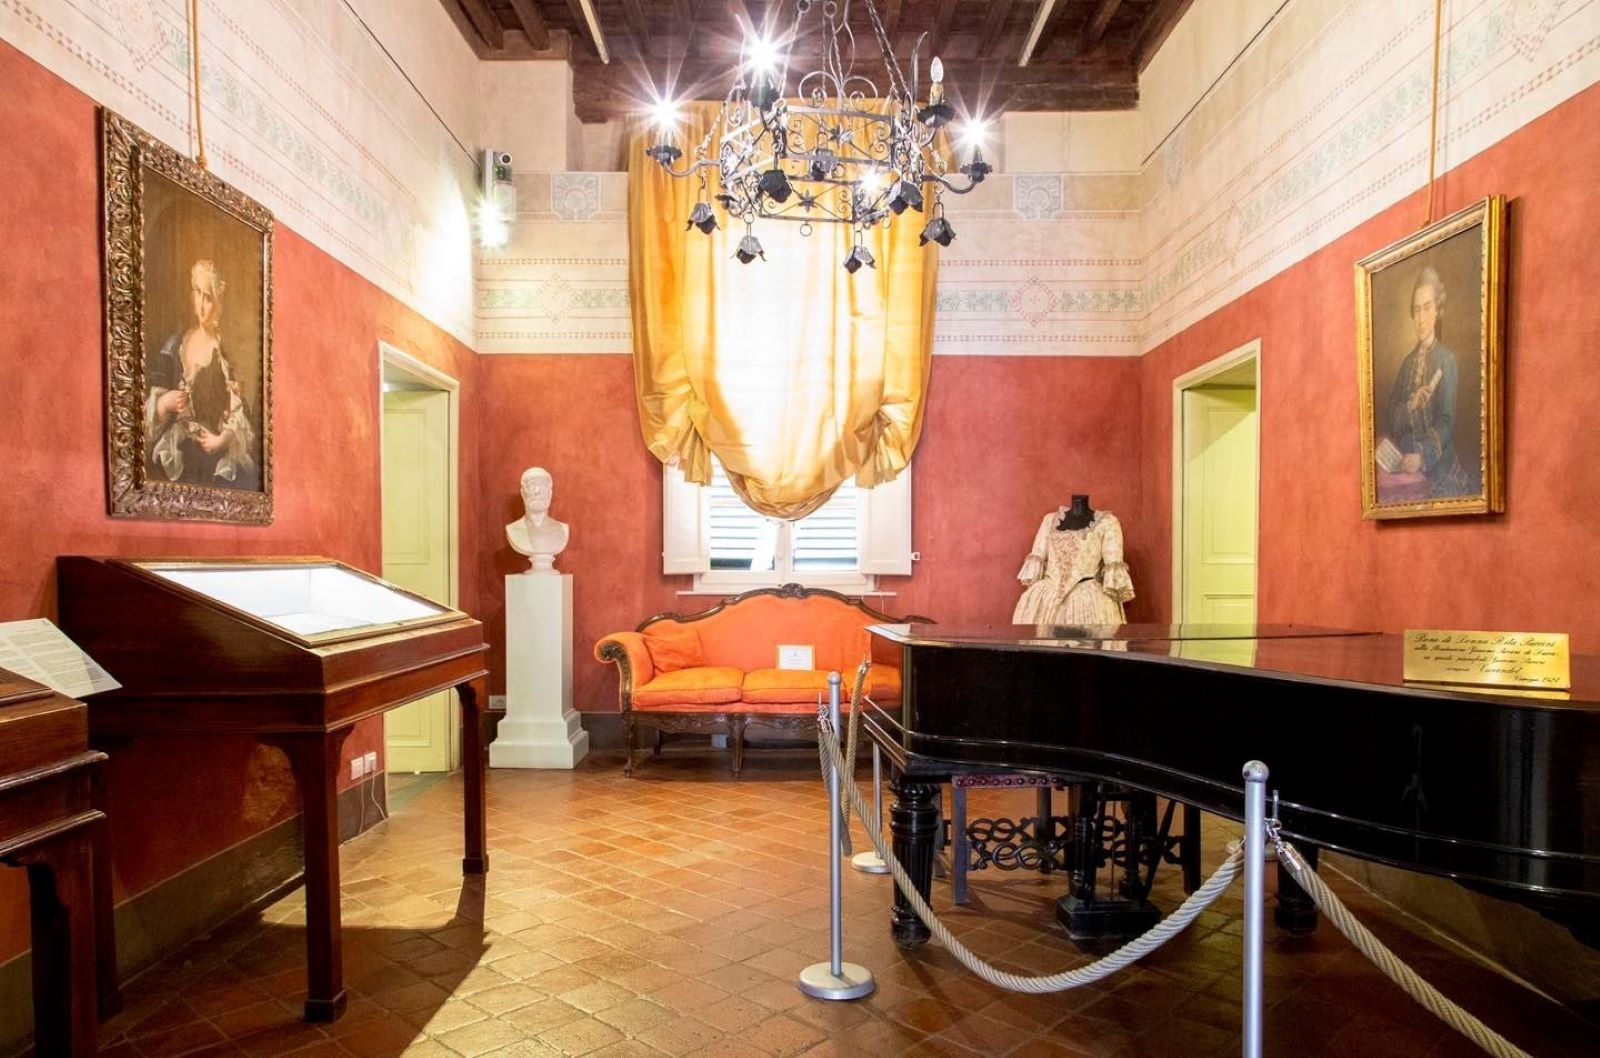 Itinerary in the places of Giacomo Puccini between Lucca and Versilia